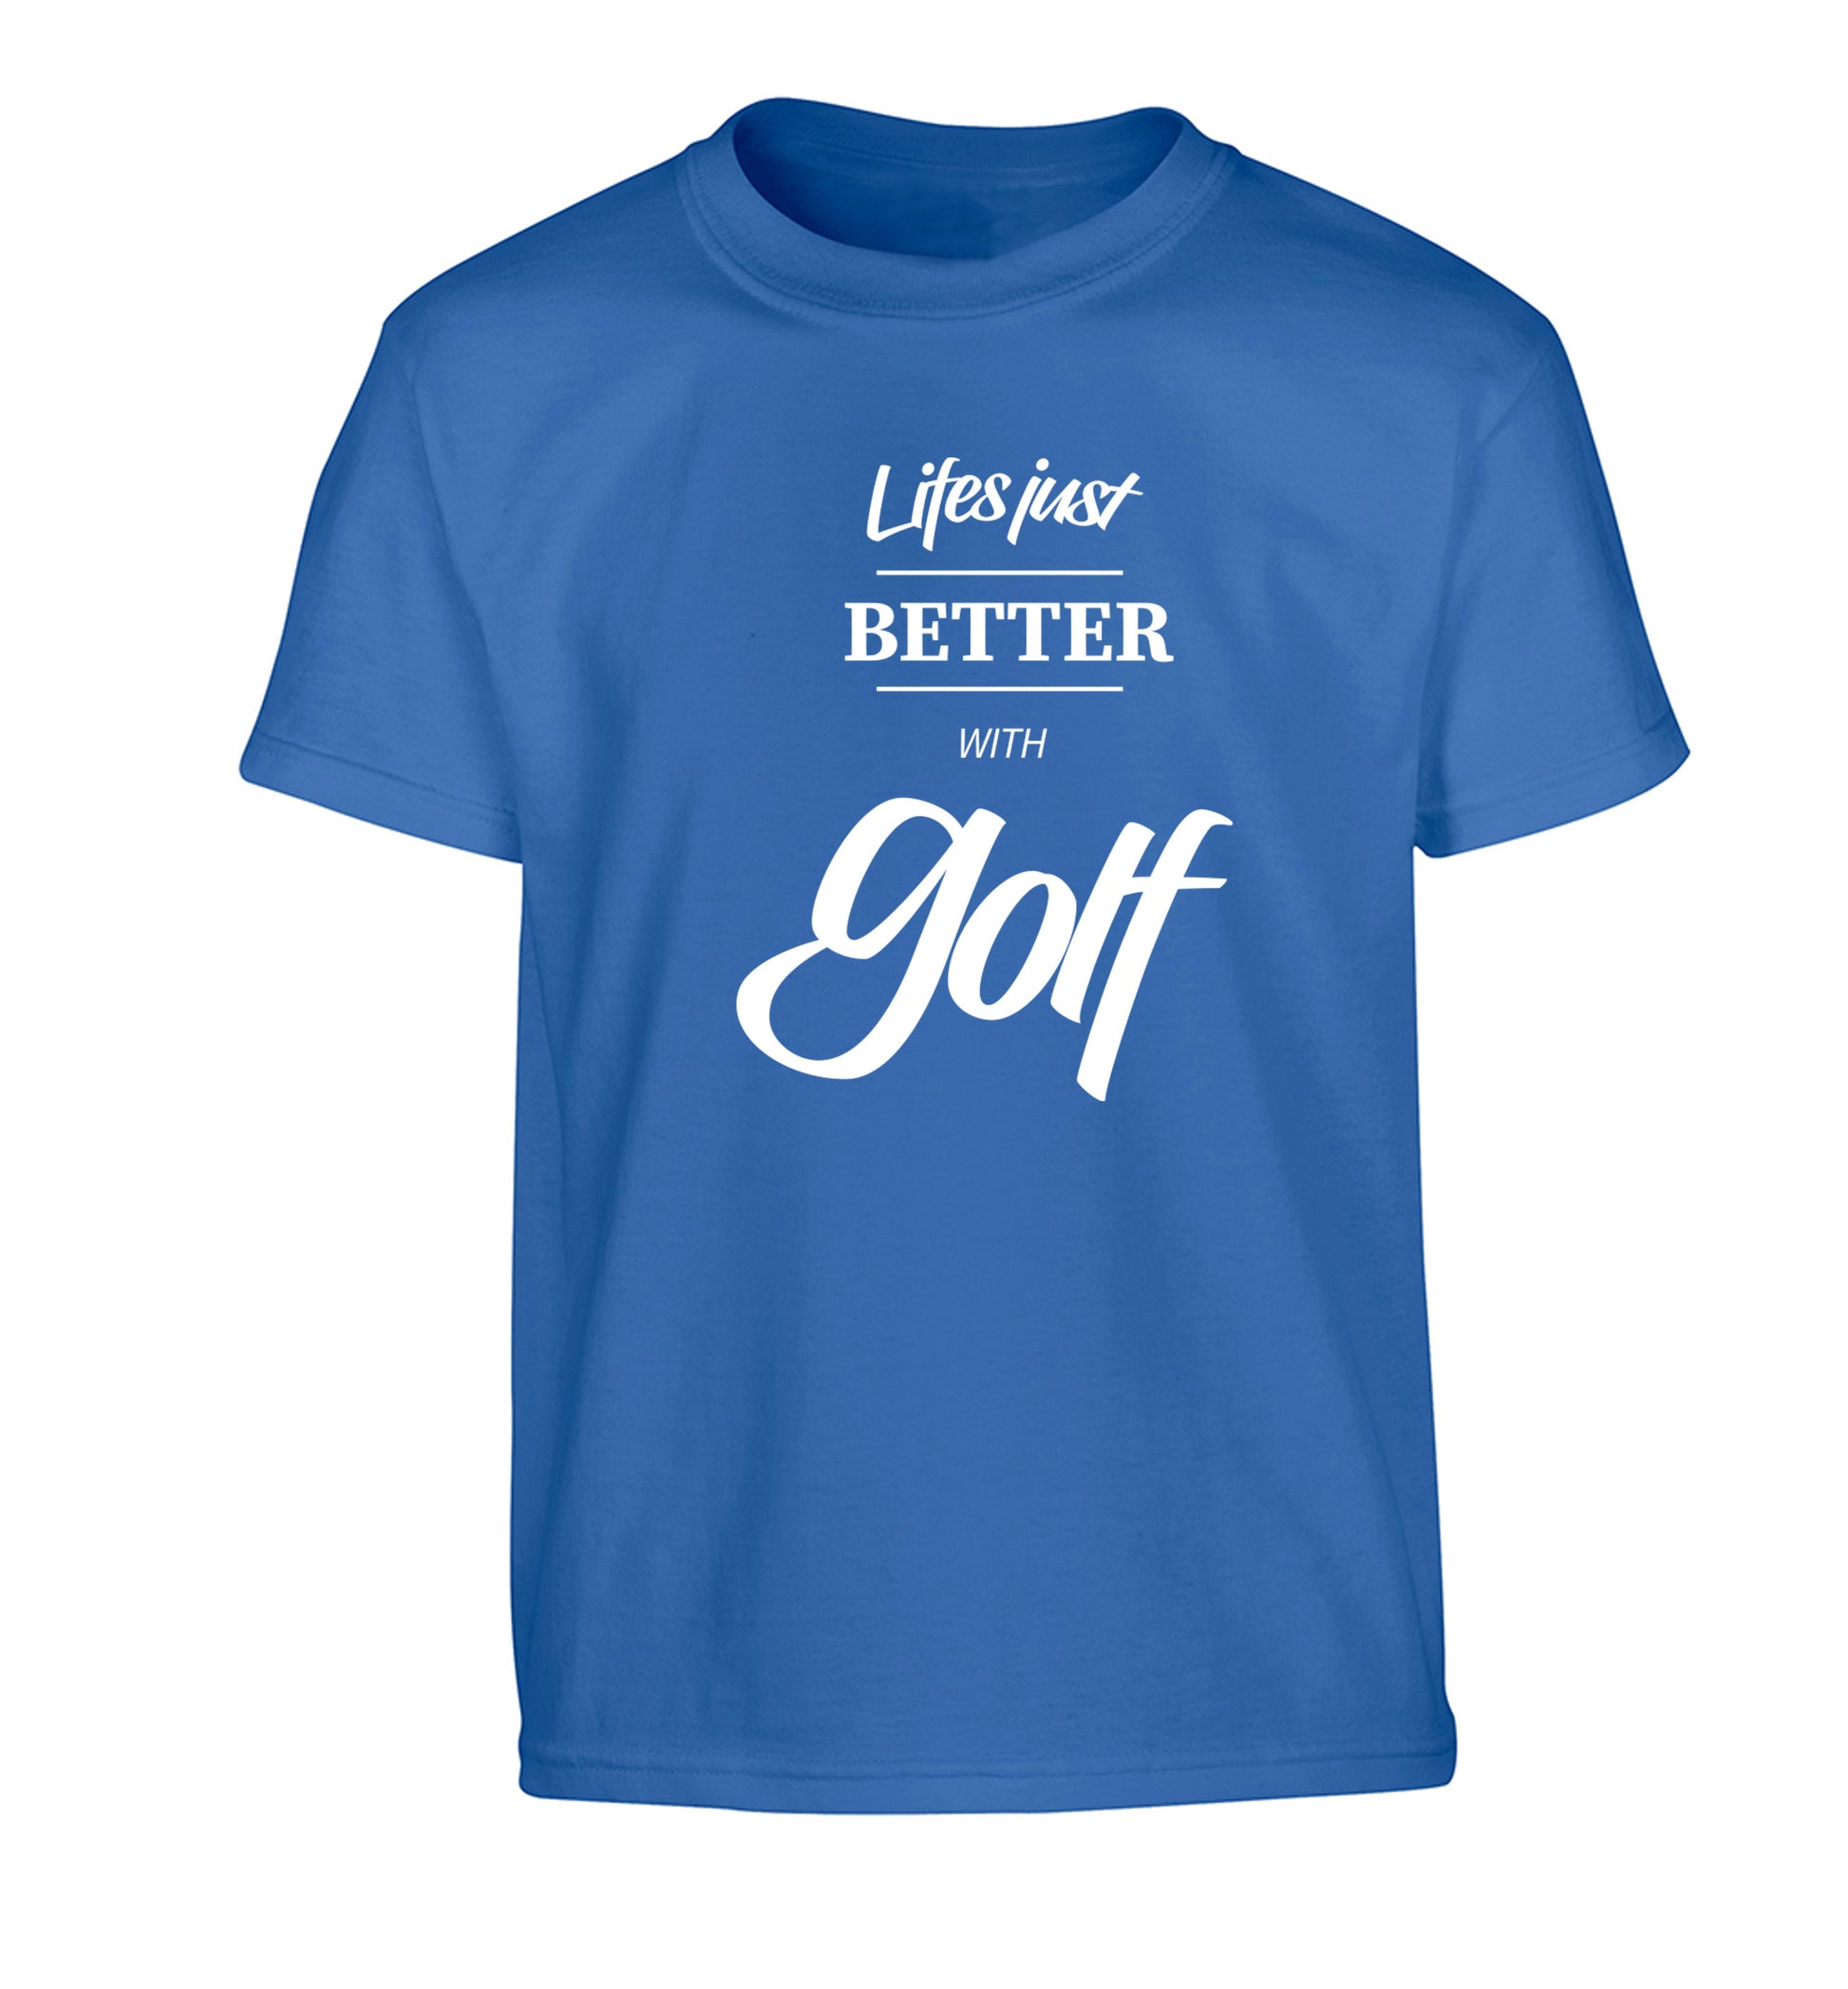 Life is better with golf Children's blue Tshirt 12-13 Years